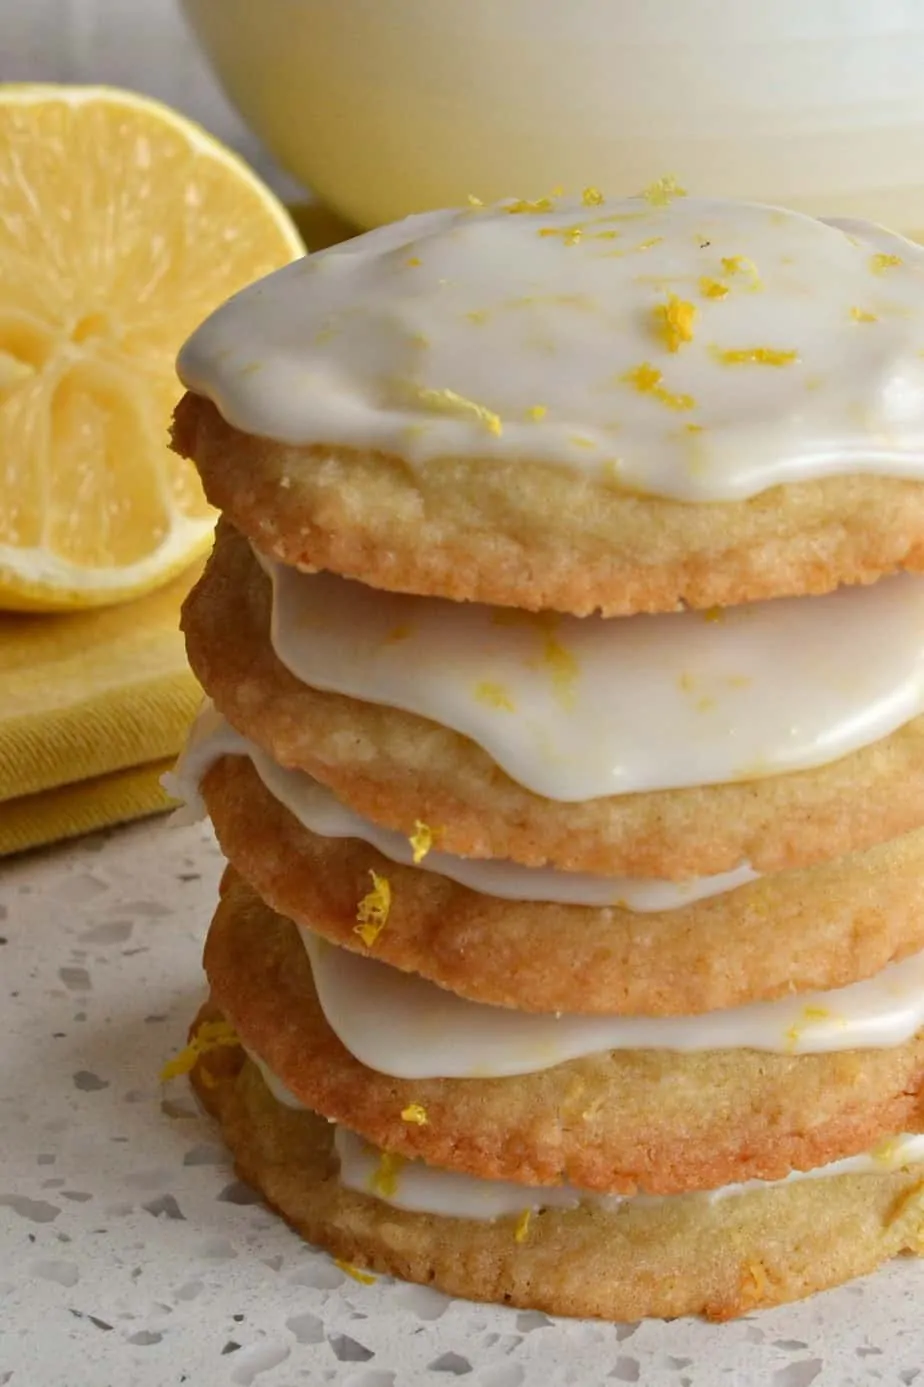 Iced Lemon Cookies are soft on the inside with slightly crispy edges all topped with a tangy sweet lemon glaze.